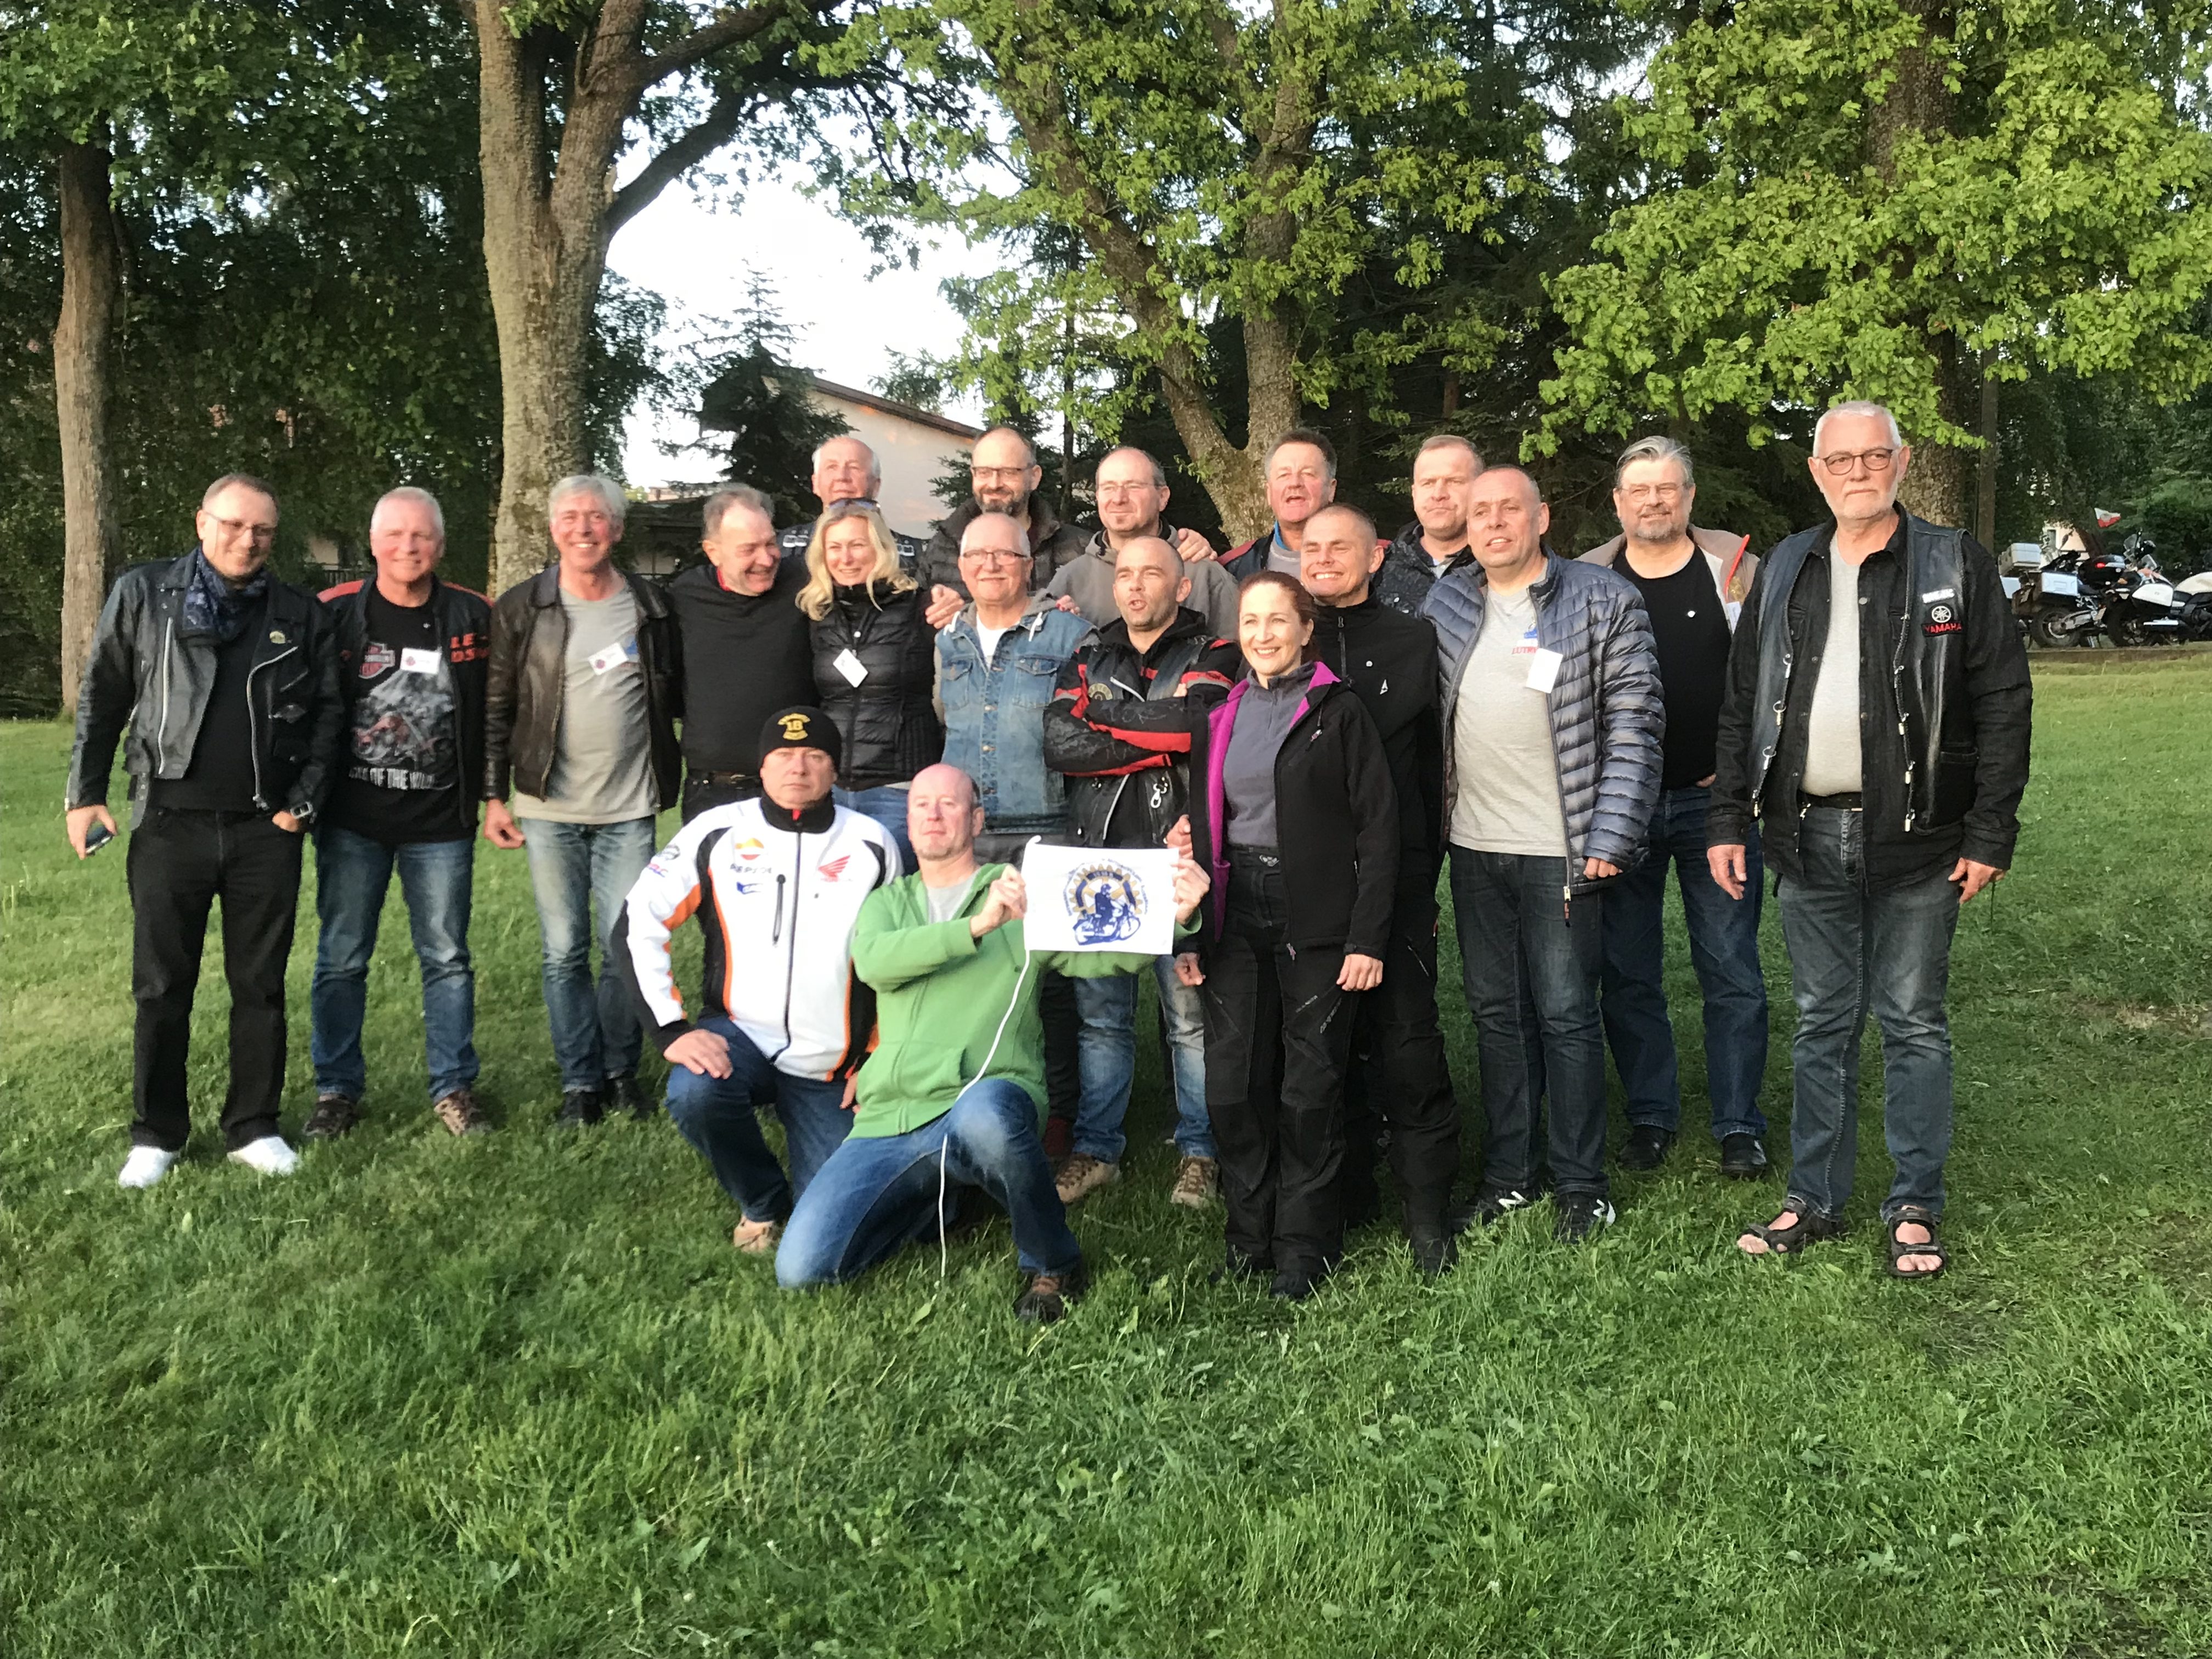 IFMR POLSKA Chapter made Saturday the 19.May 2018